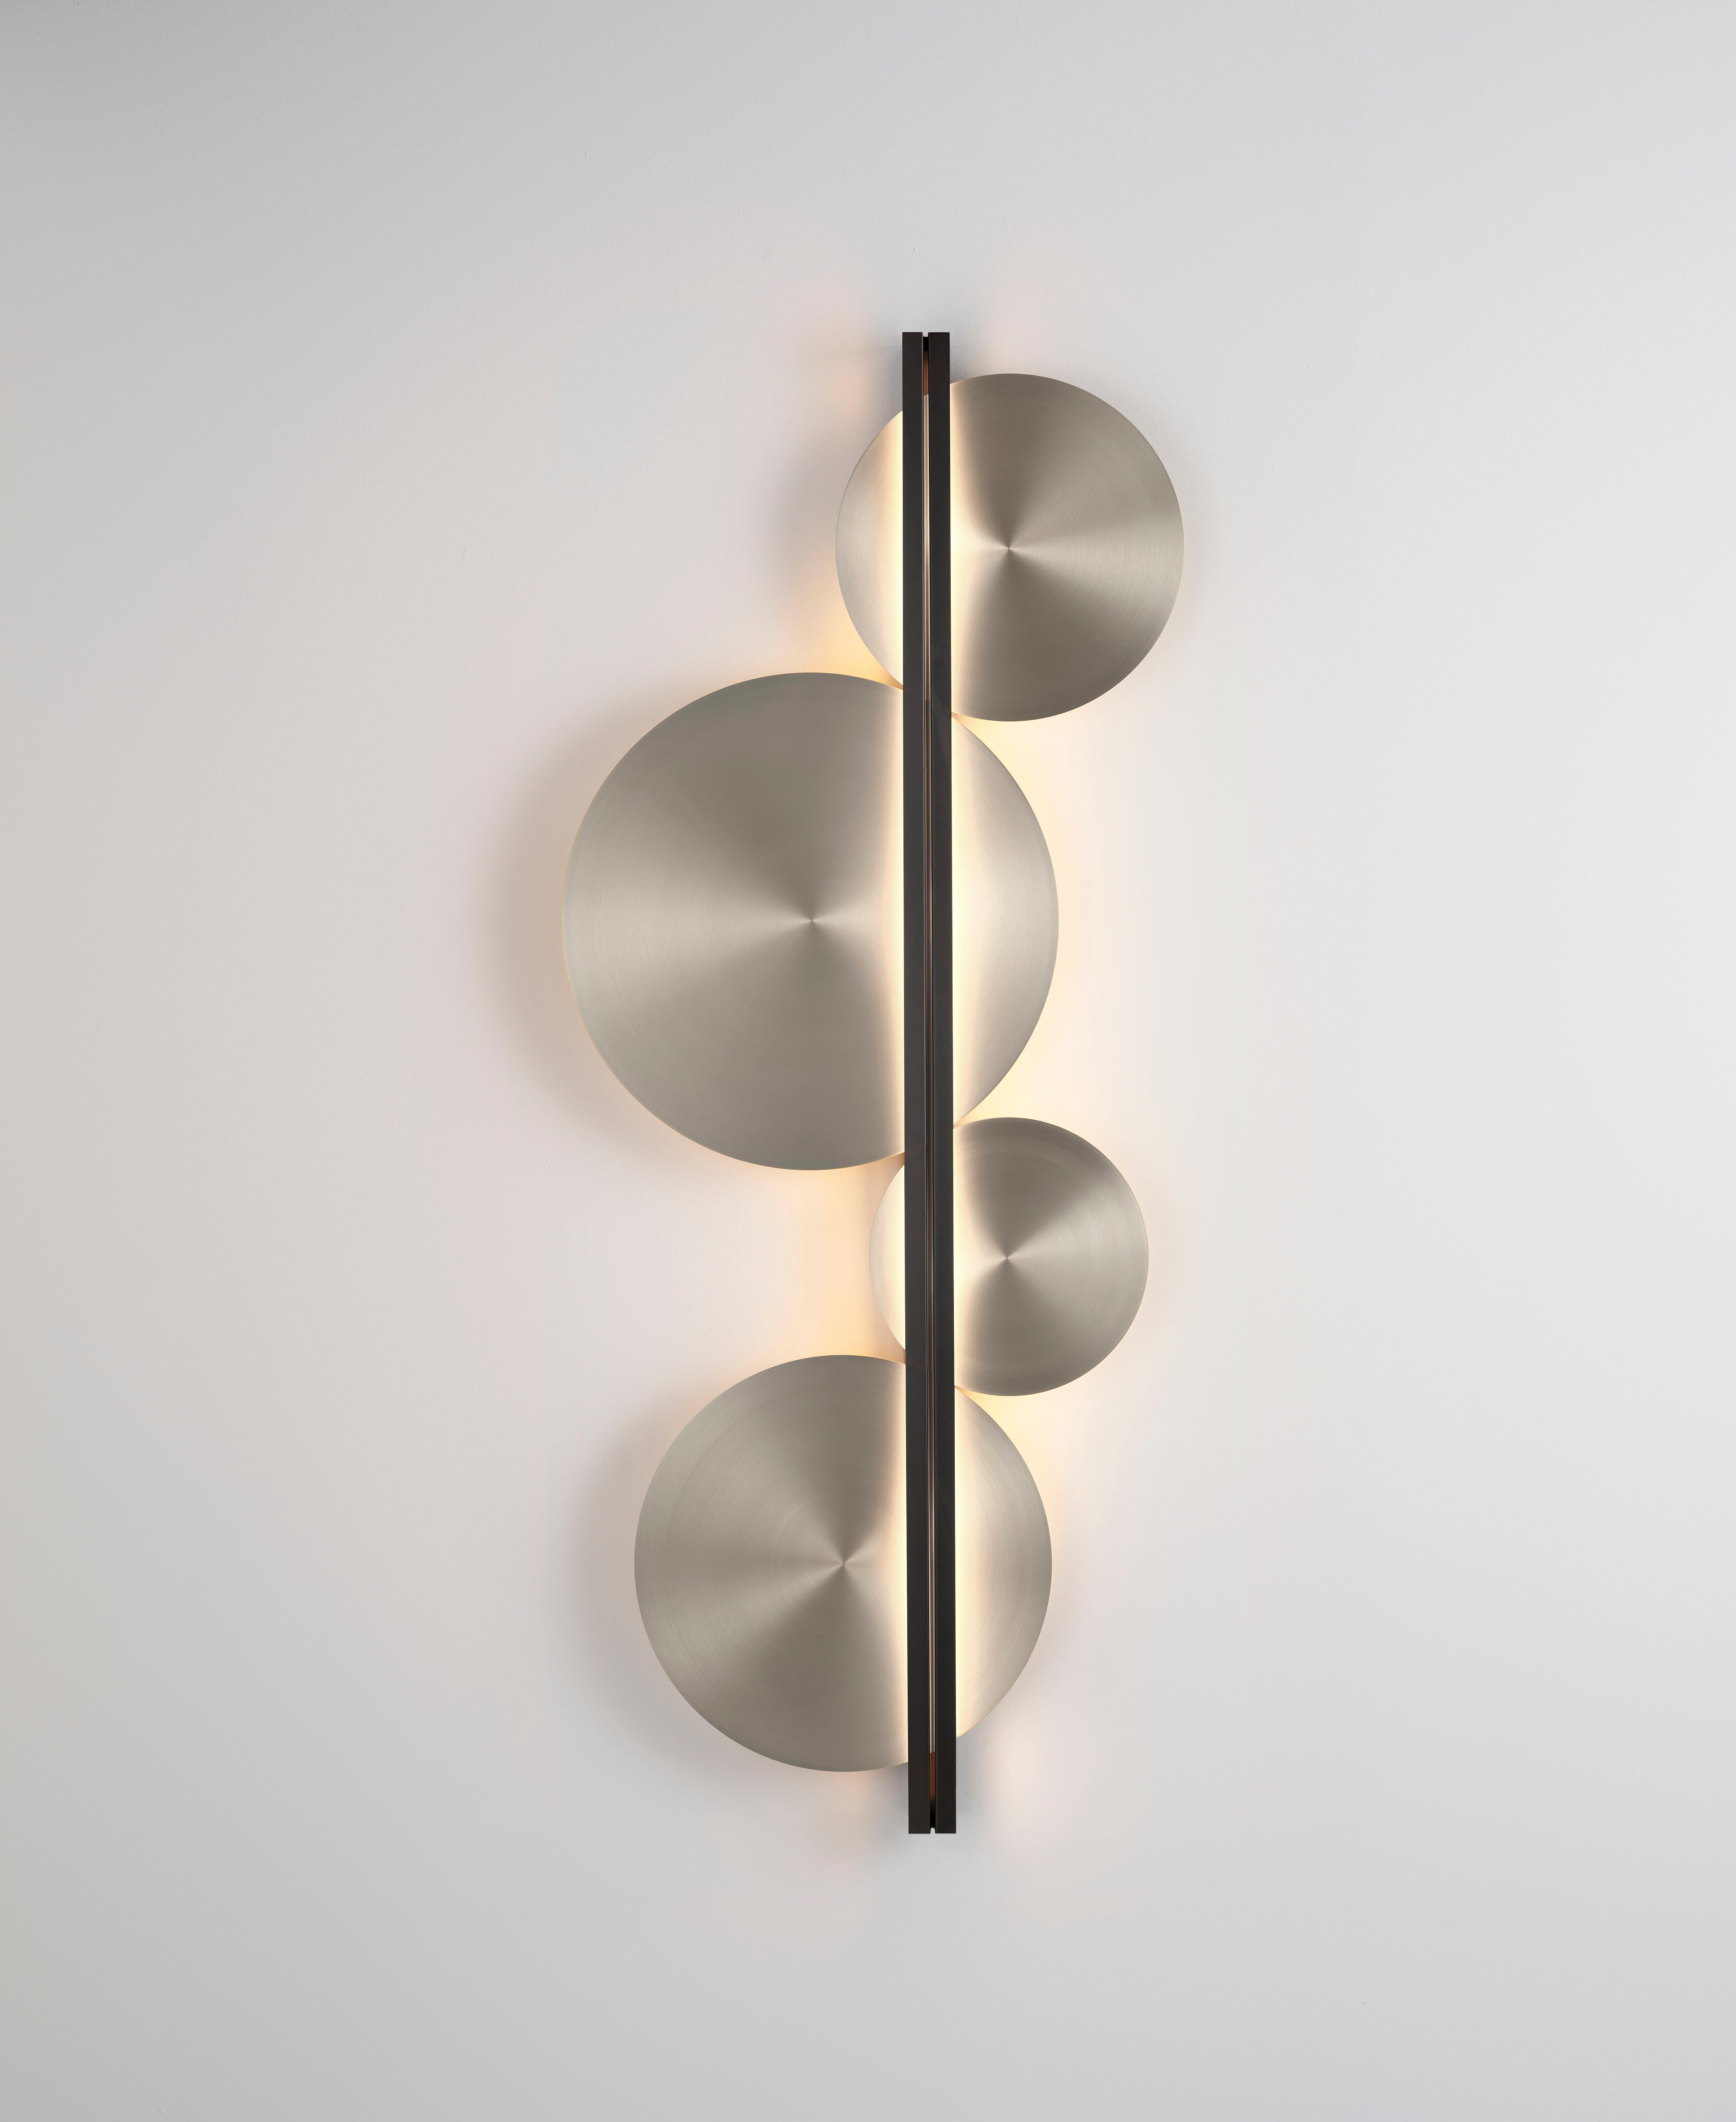 Strate moon wall light by Emilie Cathelineau.
Dimensions: W 62.9 x D 8.7 x H 150 cm.
Materials: solid brass, Polycarbonate diffuser.
Others finishes and dimensions are available.

All our lamps can be wired according to each country. If sold to